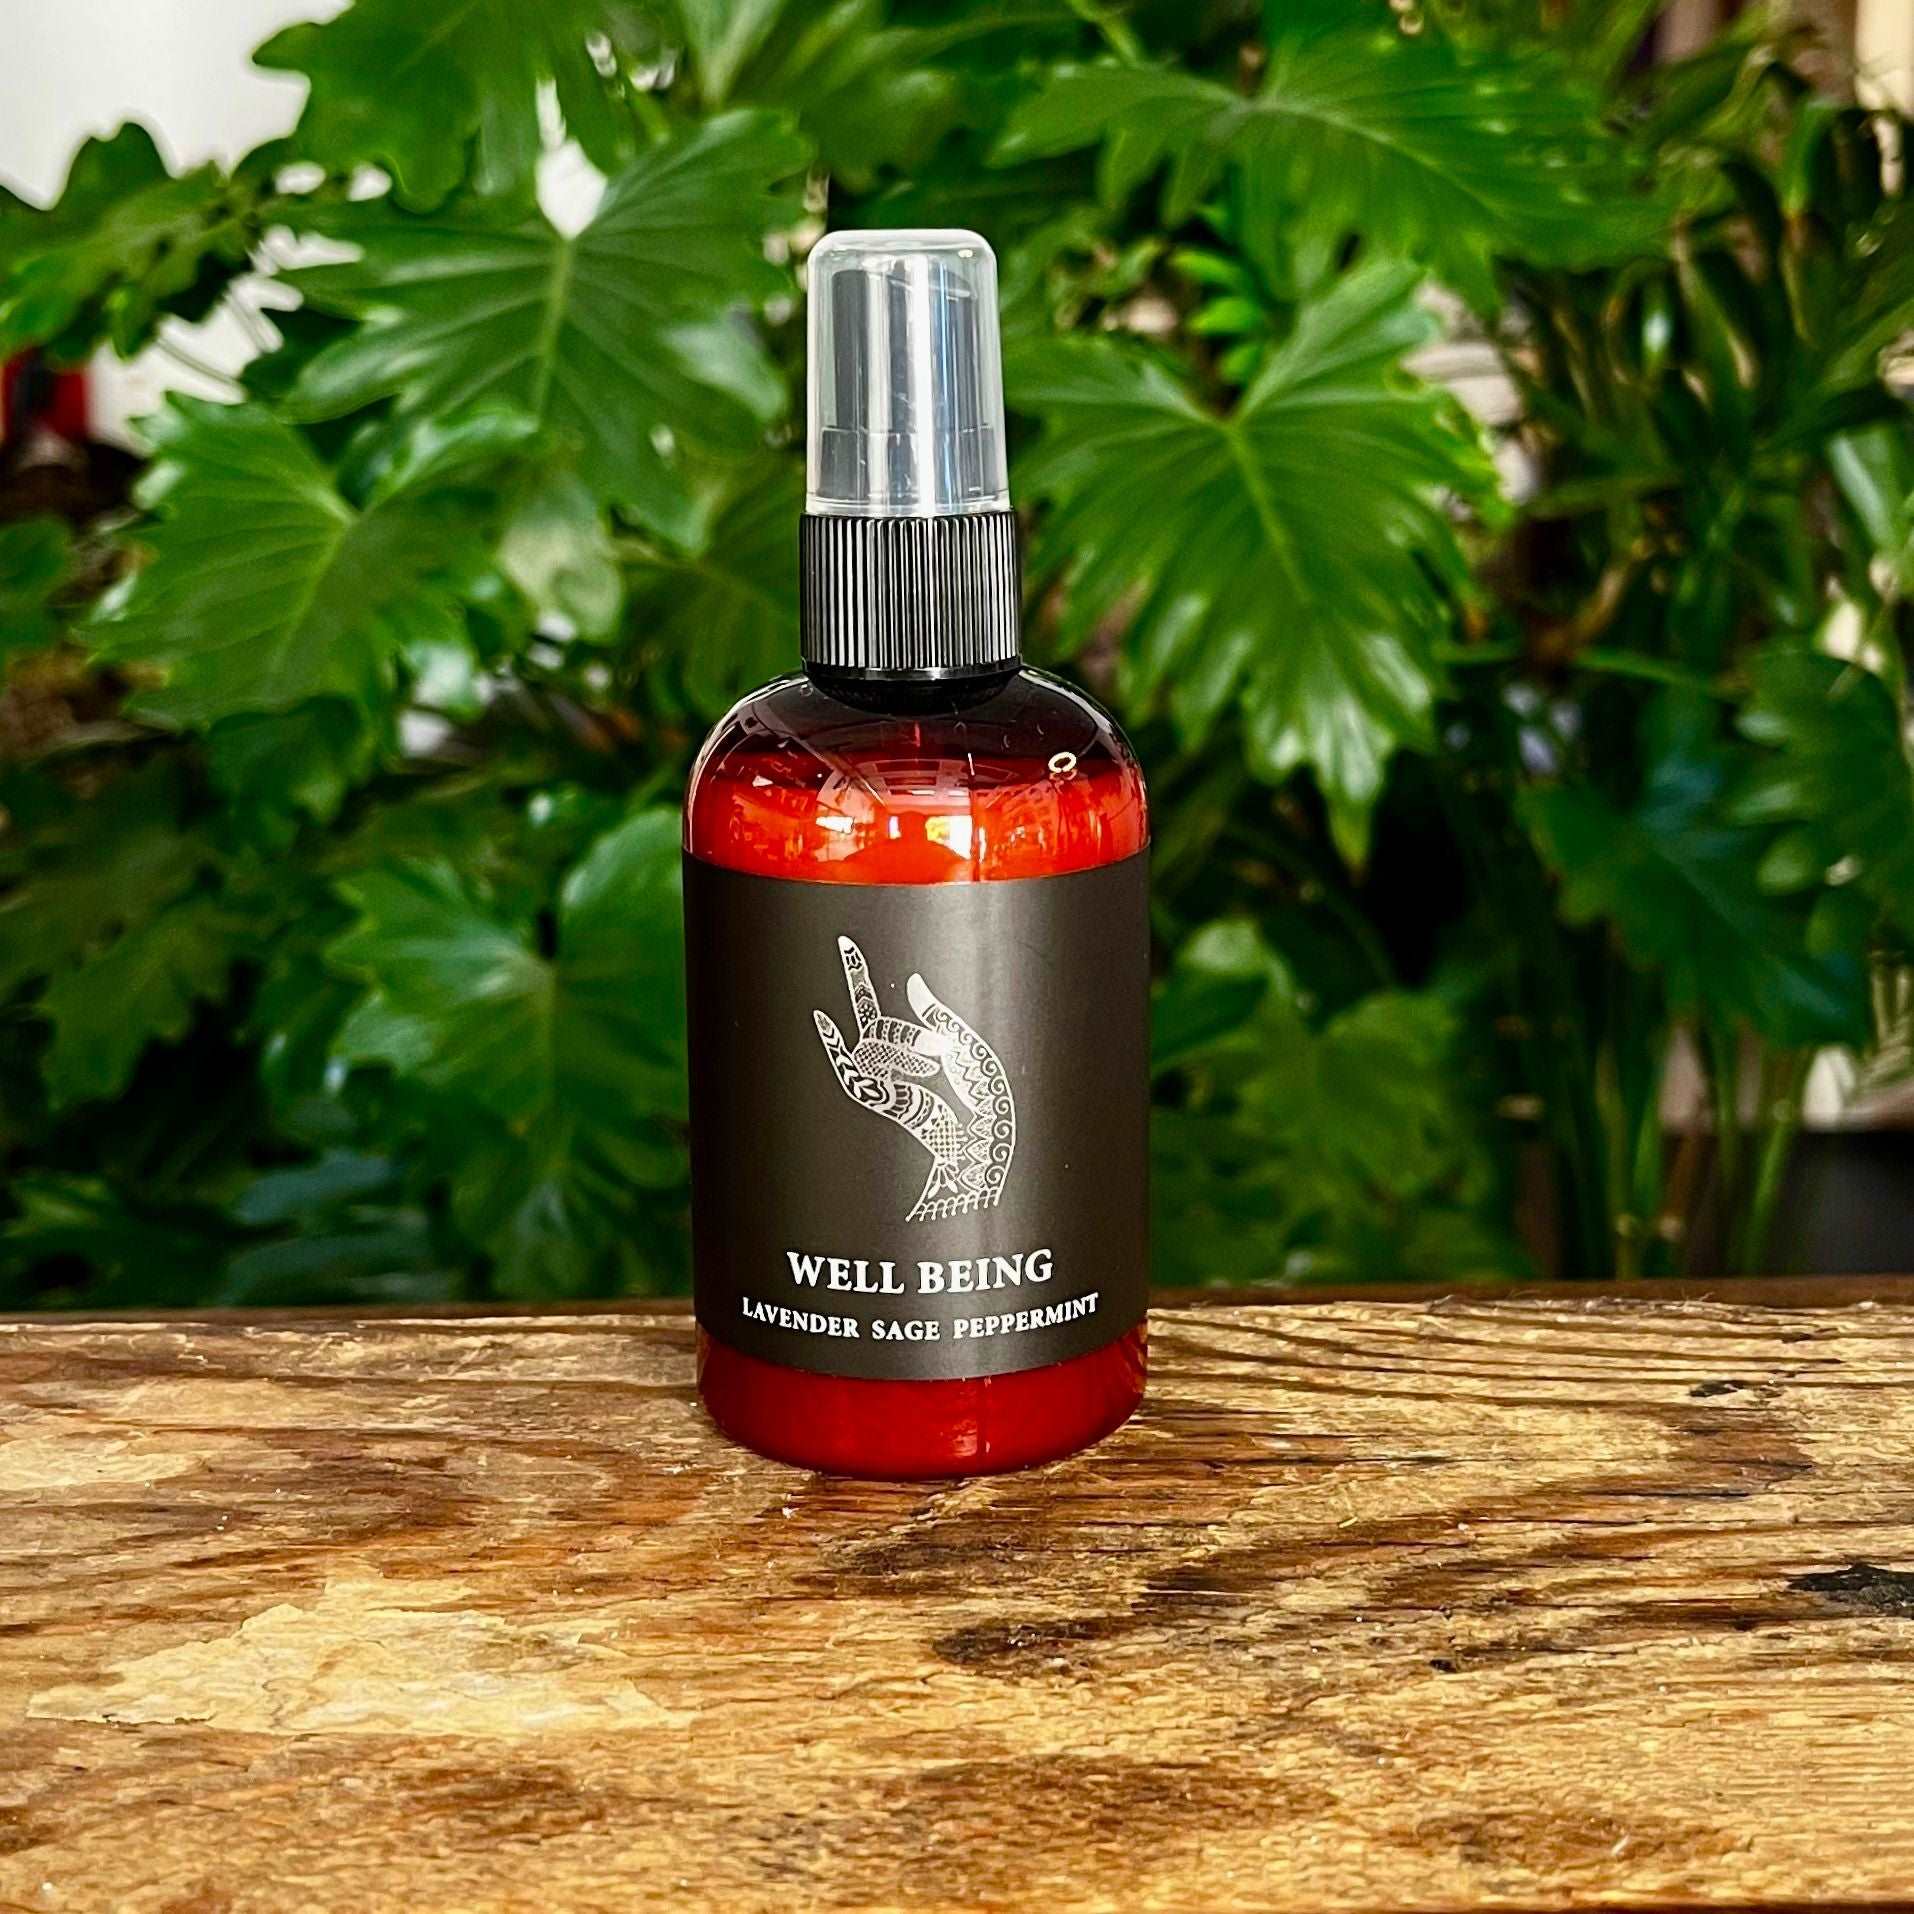 4 oz Well Being Body Mist with Organic Essential Oils of Lavender, Sage, and Peppermint, Infused with a Crystal for Relaxation and Uplifted Spirits